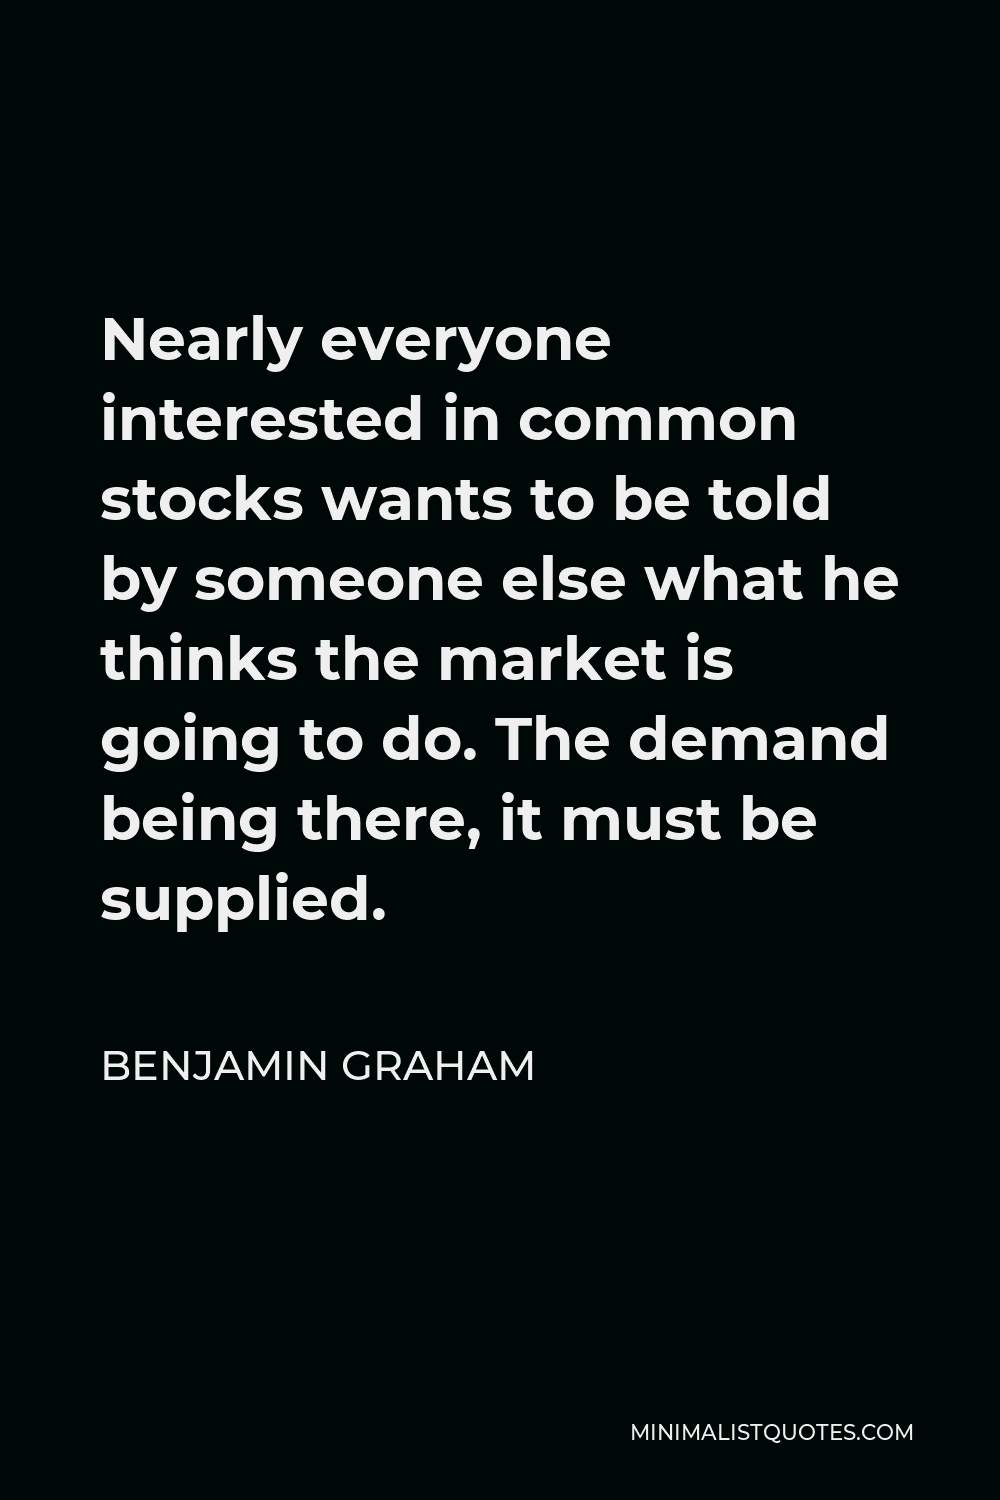 Benjamin Graham Quote - Nearly everyone interested in common stocks wants to be told by someone else what he thinks the market is going to do. The demand being there, it must be supplied.